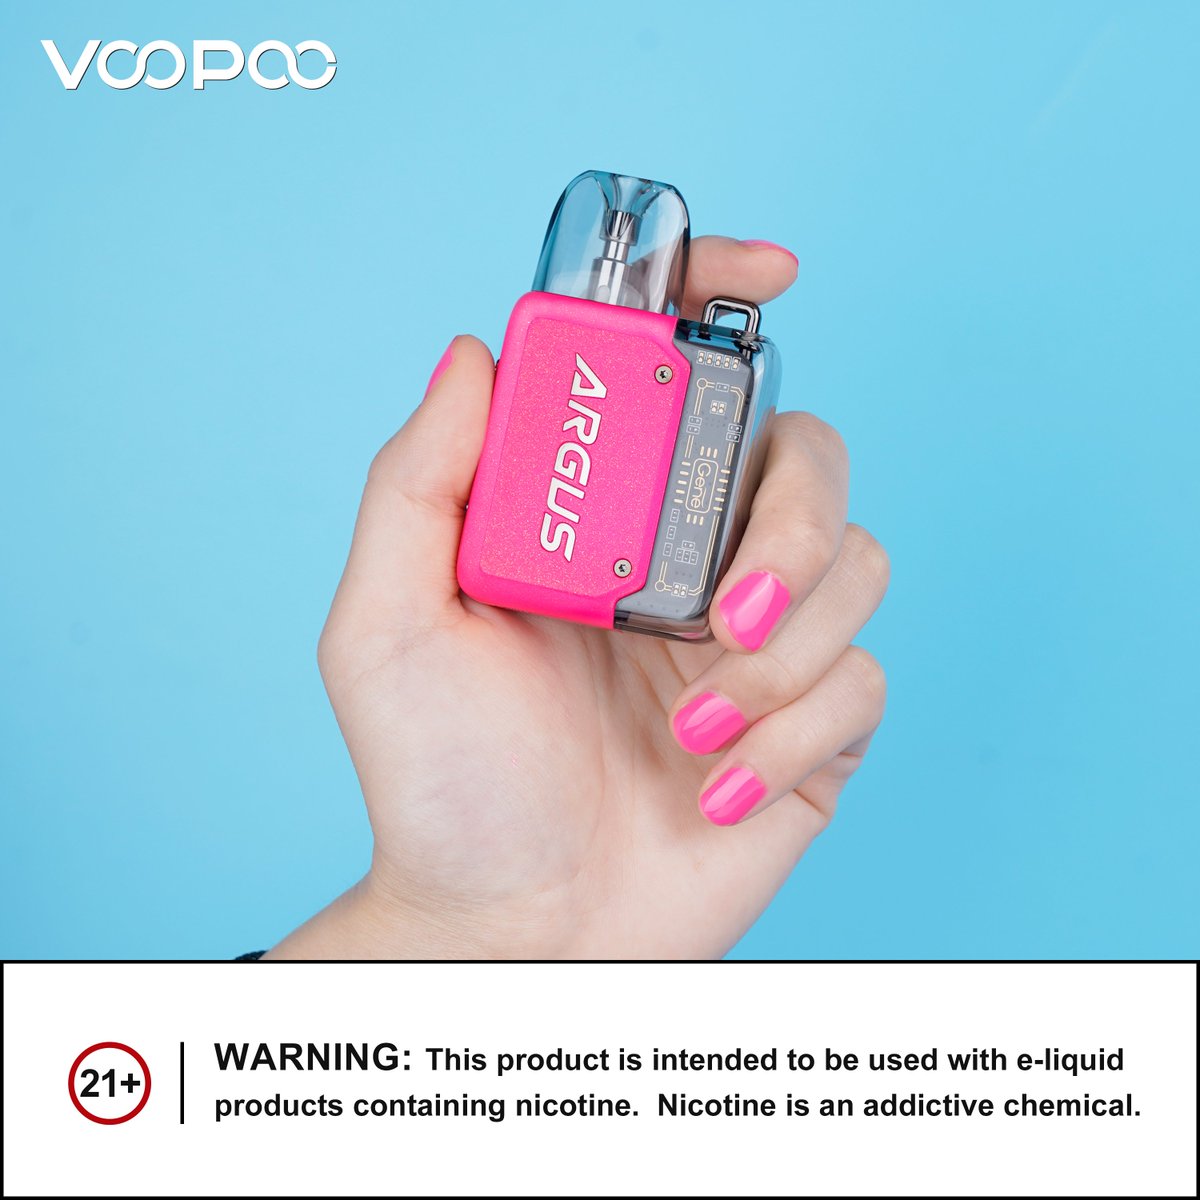 #ArgusP1 in Passion Pink. Embrace the Vibrant and Bold💗

#voopoo #voopooargus #argusp1 #newcolors #arguspodsfamily #dopamine #vapeLife #passionpink #VapeWithStyle #vapeCommunity